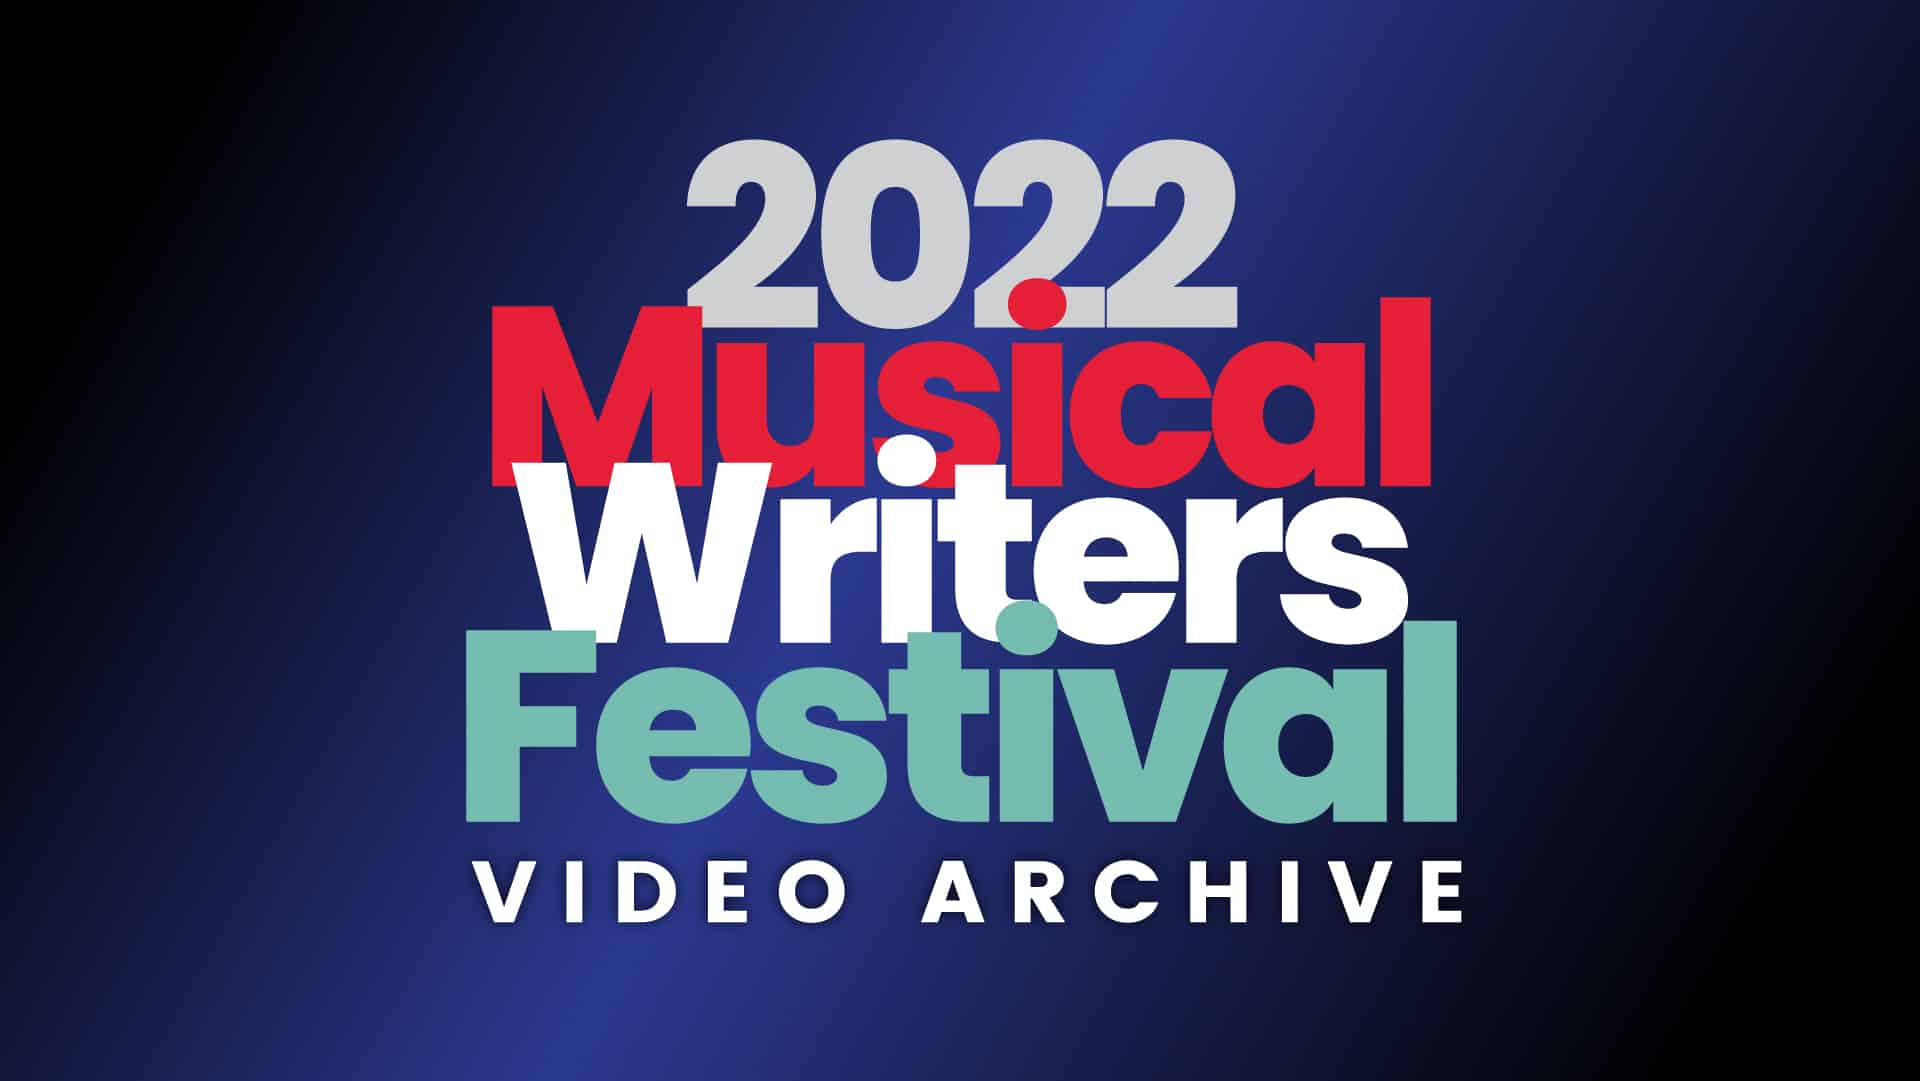 2022 Musical Writers Festival Video Archives